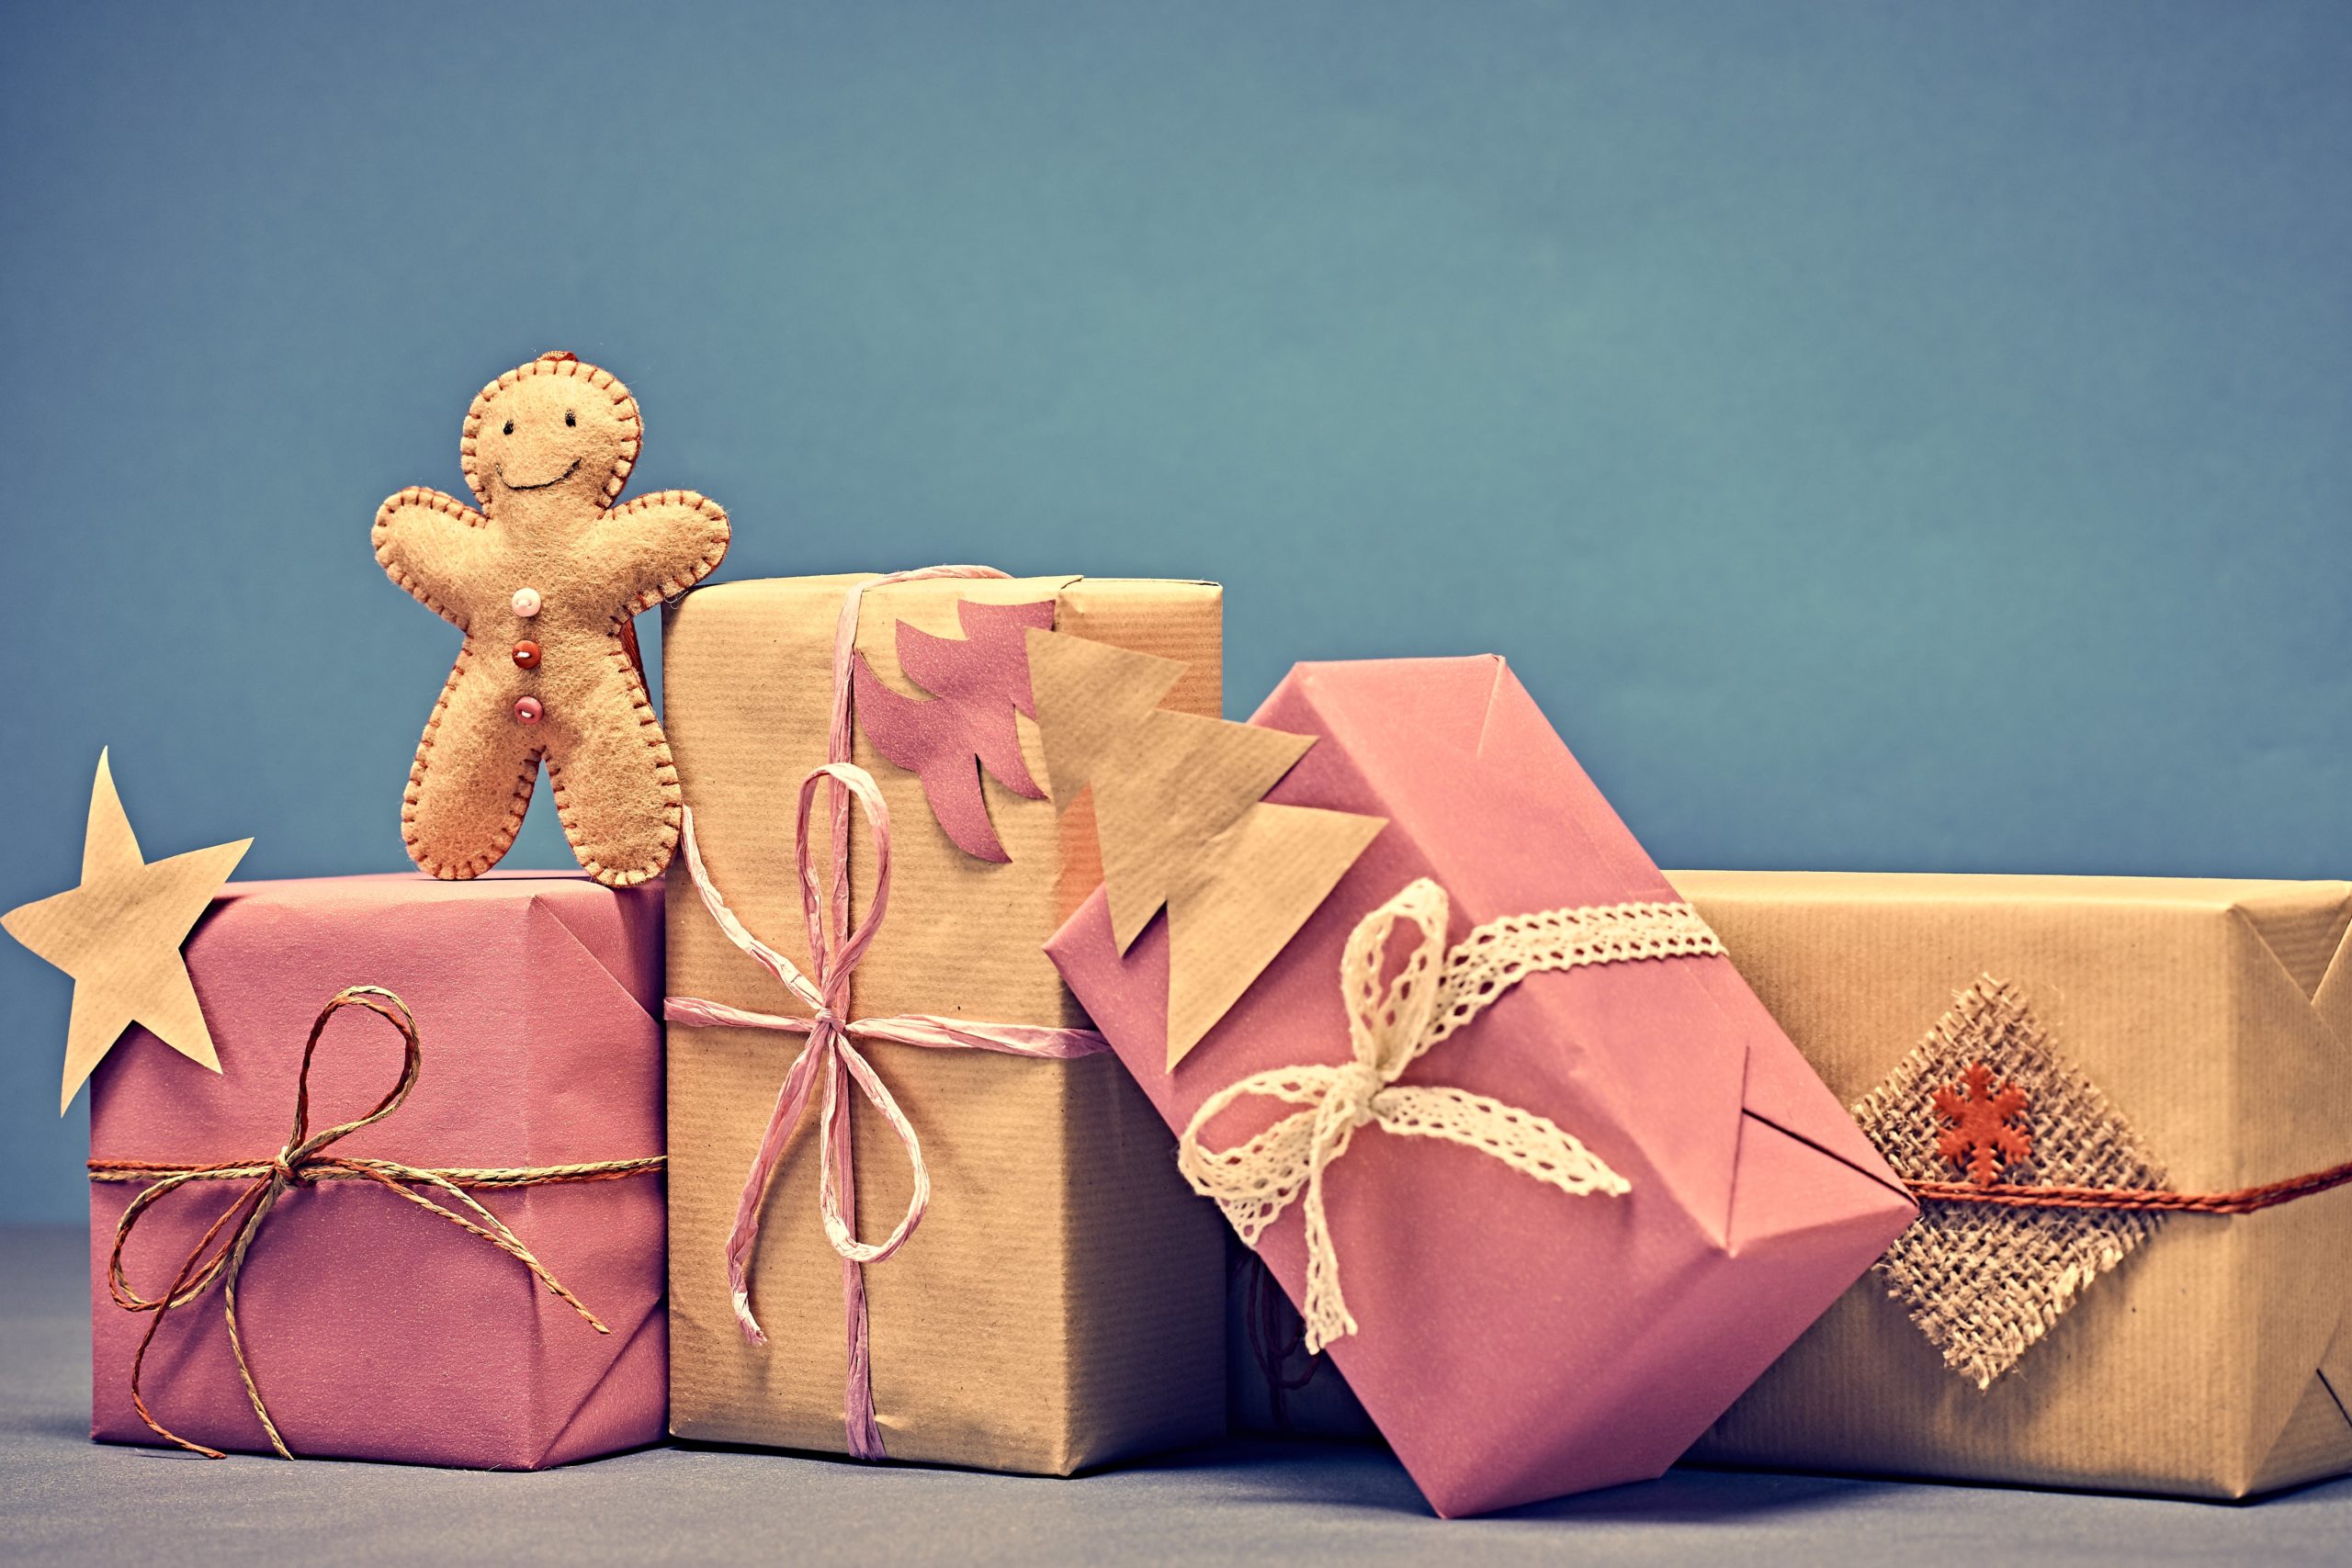 Reasons Why Gift Hampers Make Great Presents